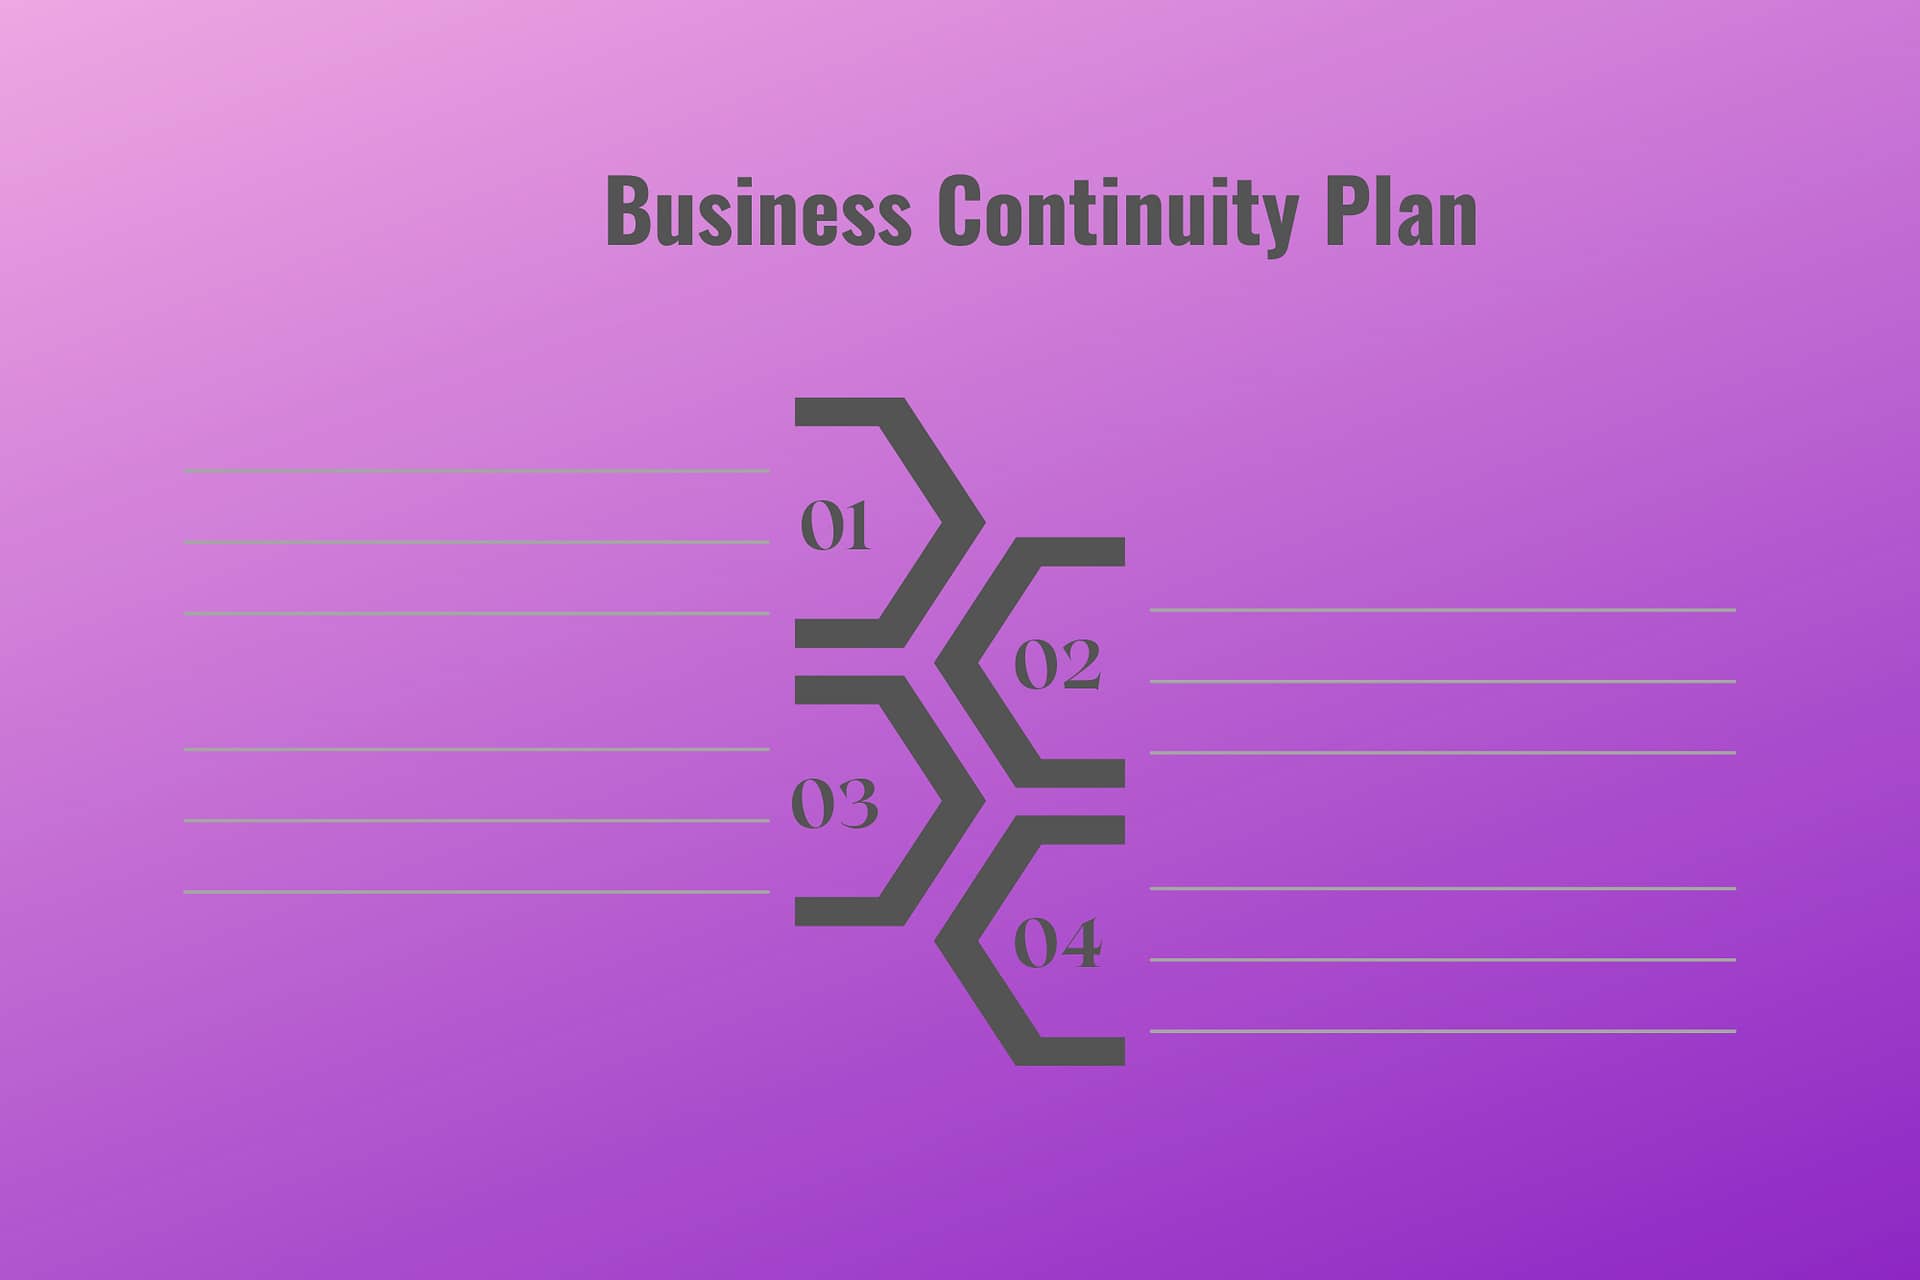 Does Your Cannabis Retail Store Have a Business Continuity Plan (BCP)?